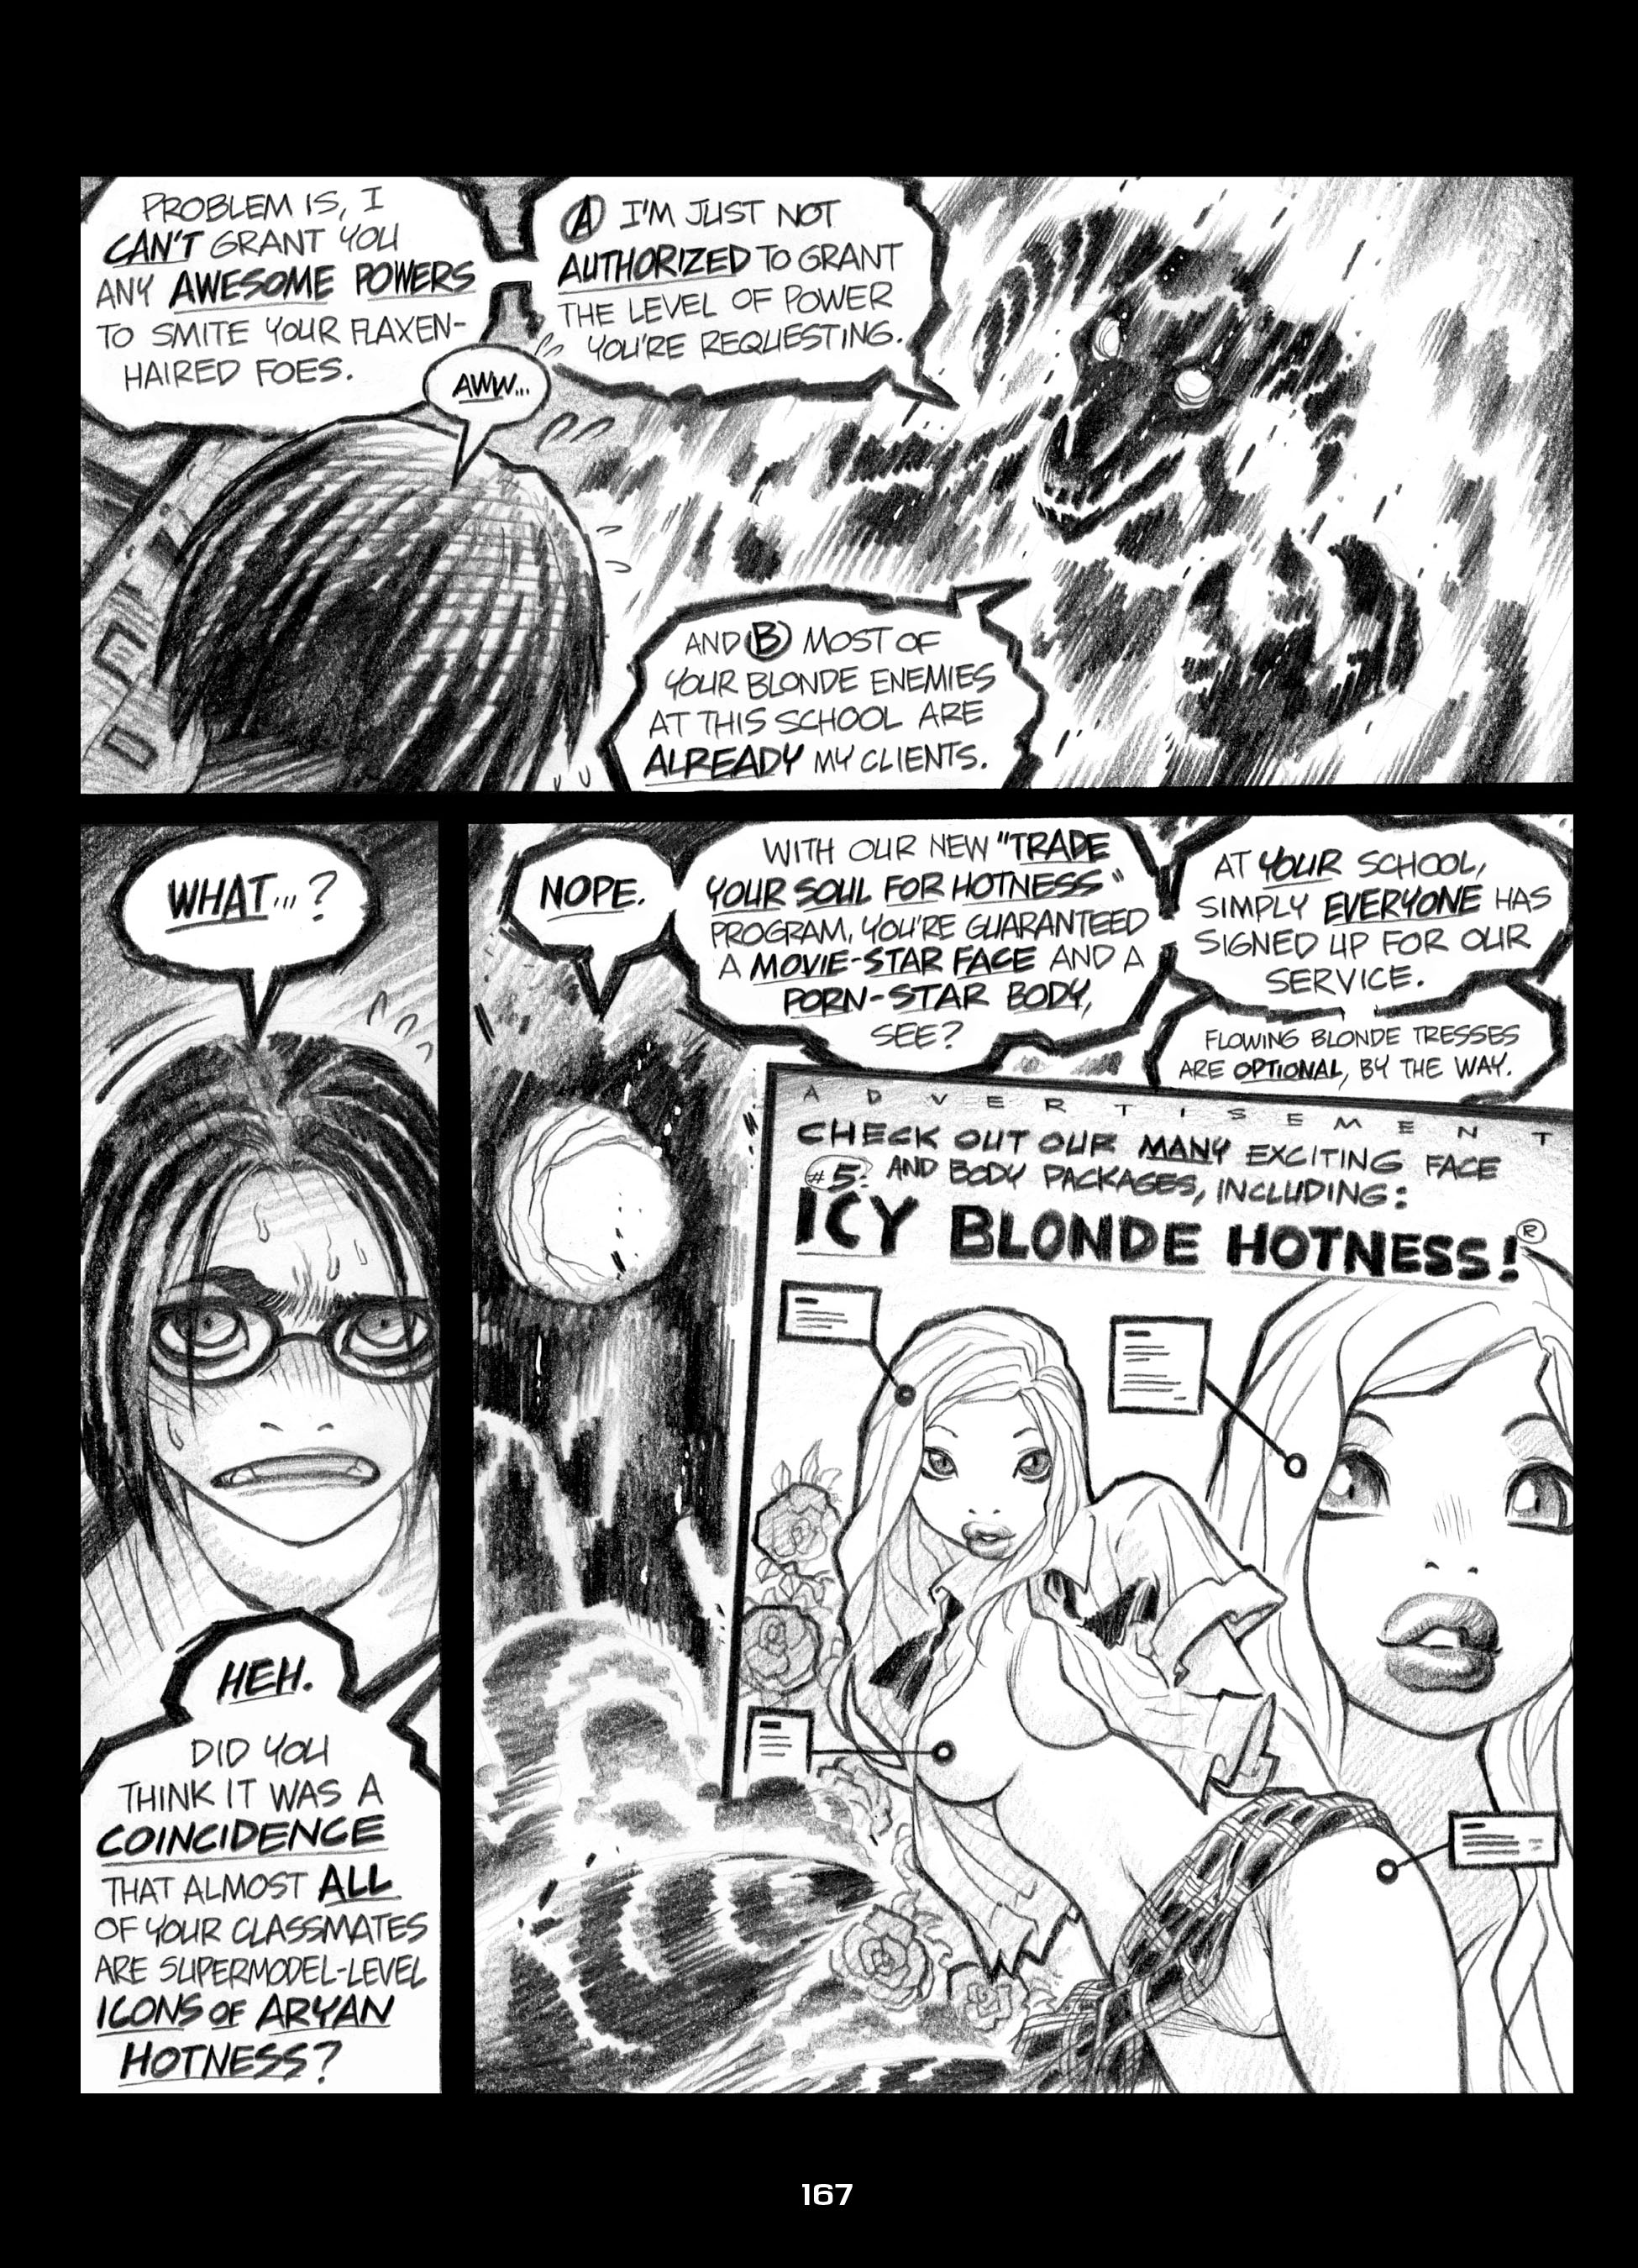 Read online Empowered comic -  Issue #1 - 167